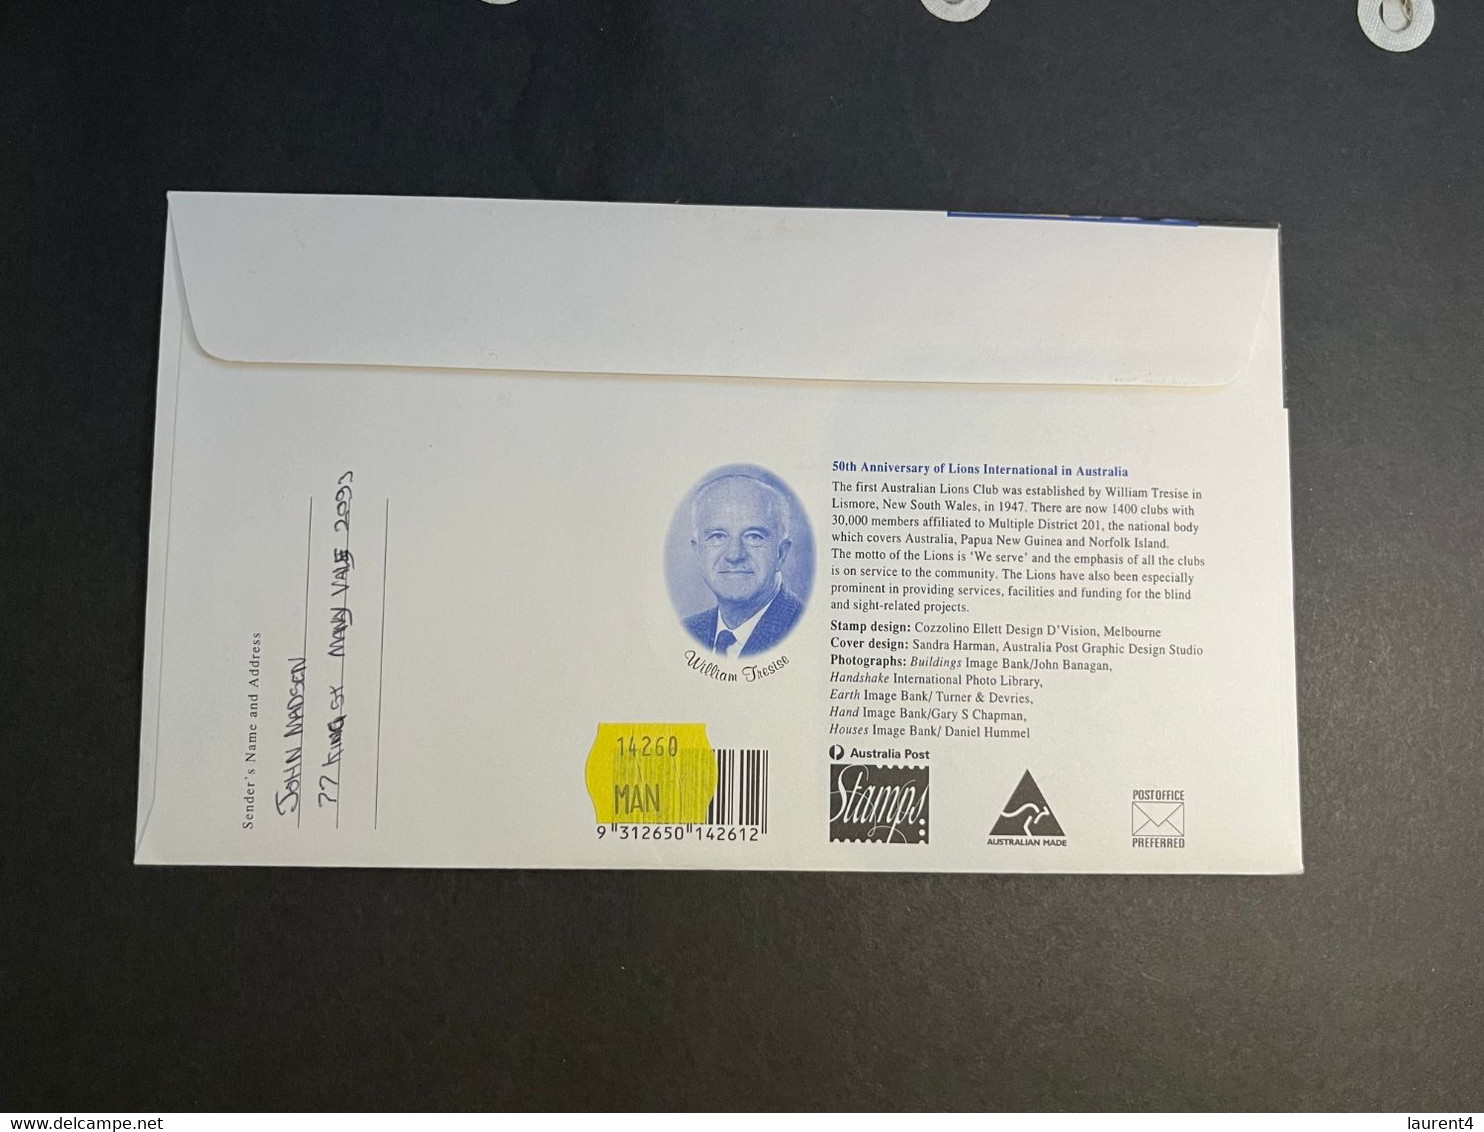 (3 N 35 B) Australia - Underpaid Letter (TAXED) No Stamp Used On Cover (Lions 50th Anniversary FDC Cover) - Variétés Et Curiosités